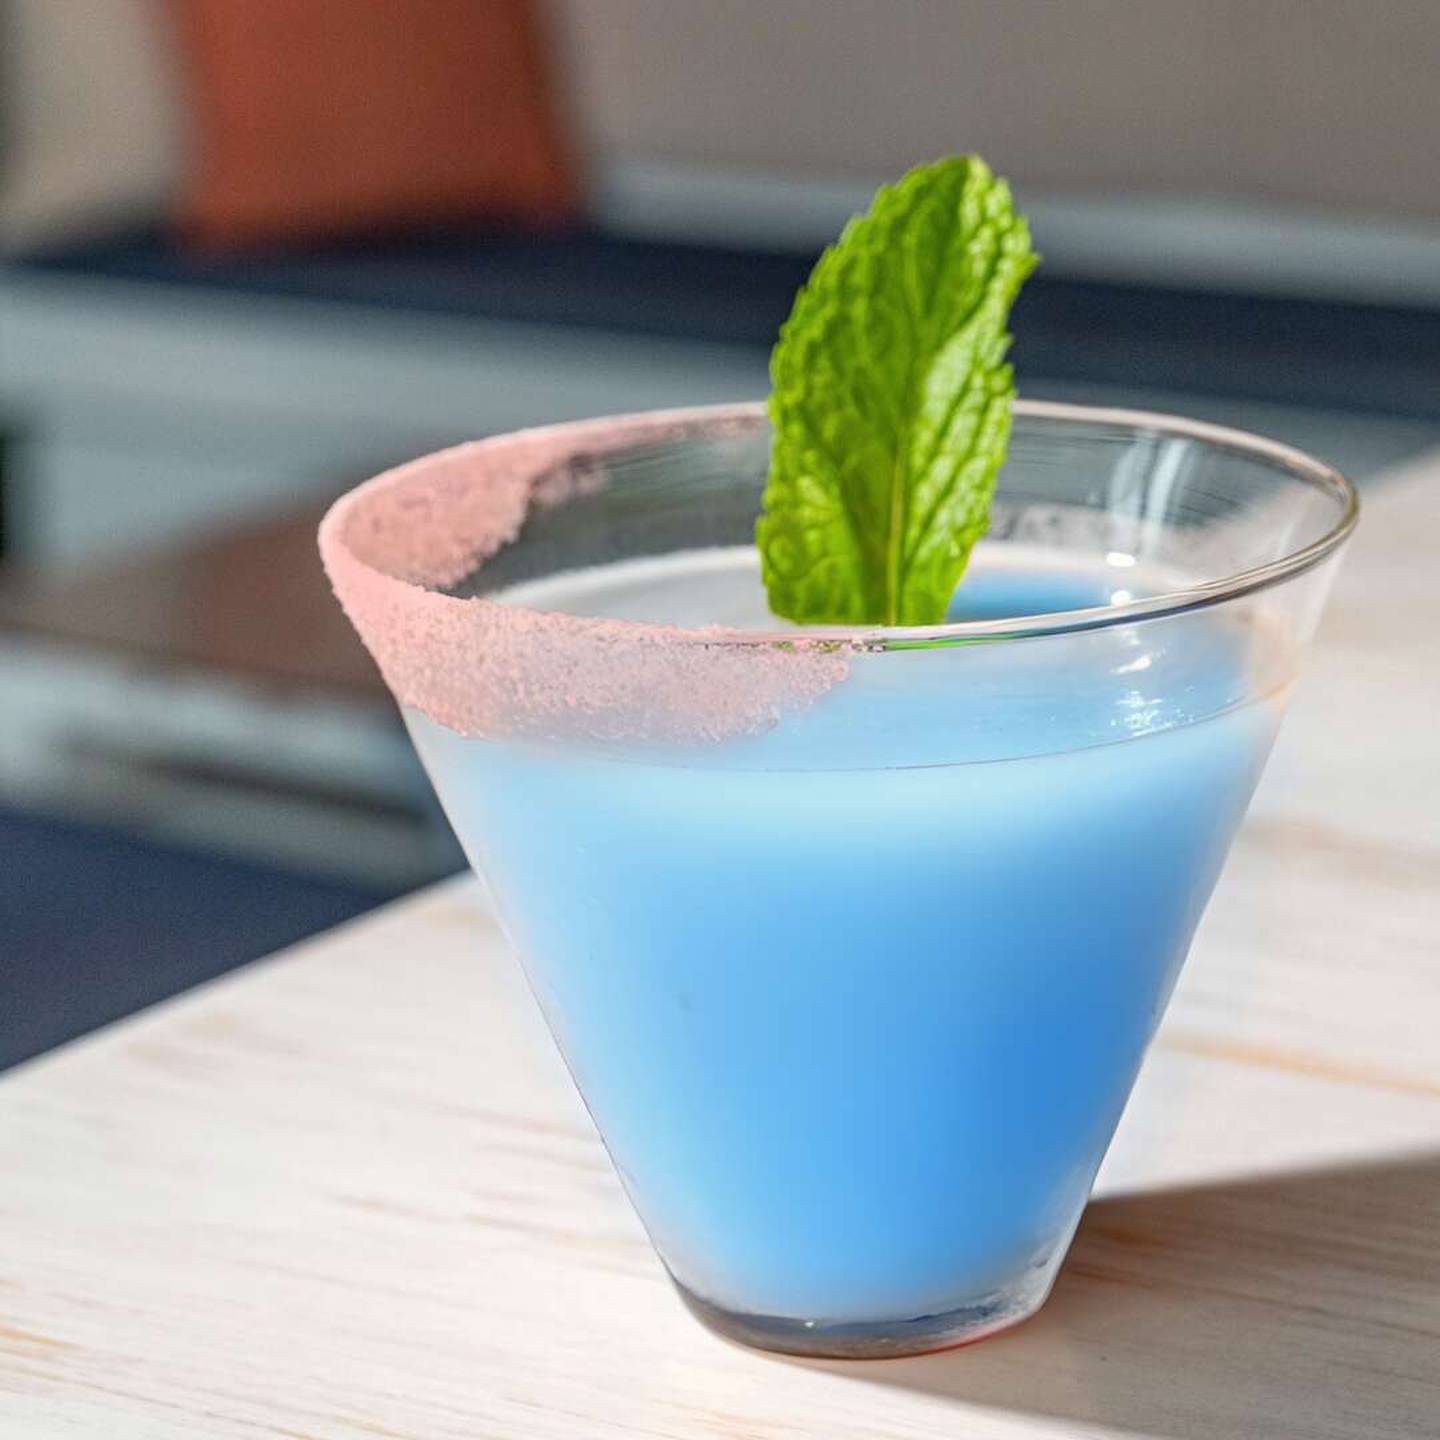 The Hampton Social has brought back its blue frose for the Fourth of July.